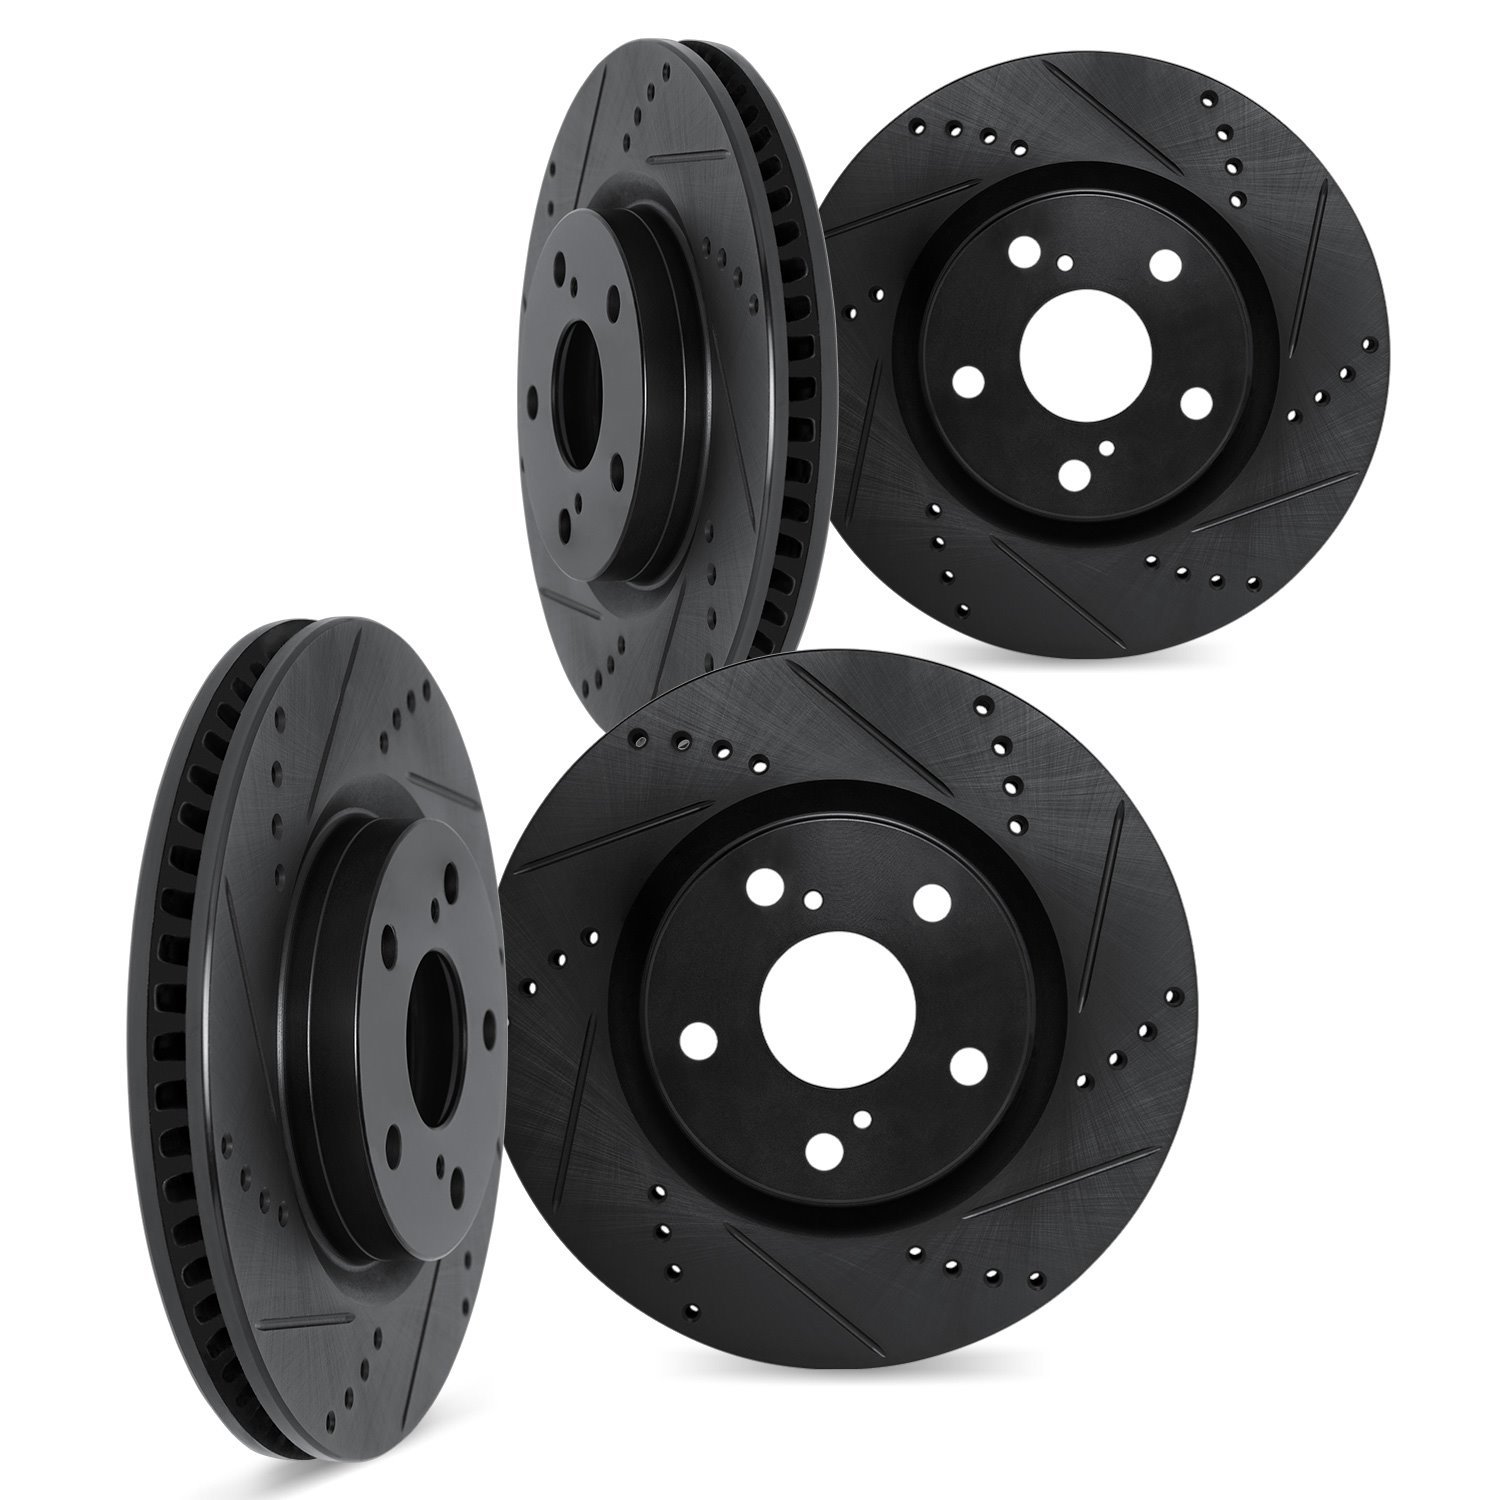 8004-13003 Drilled/Slotted Brake Rotors [Black], Fits Select Subaru, Position: Front and Rear